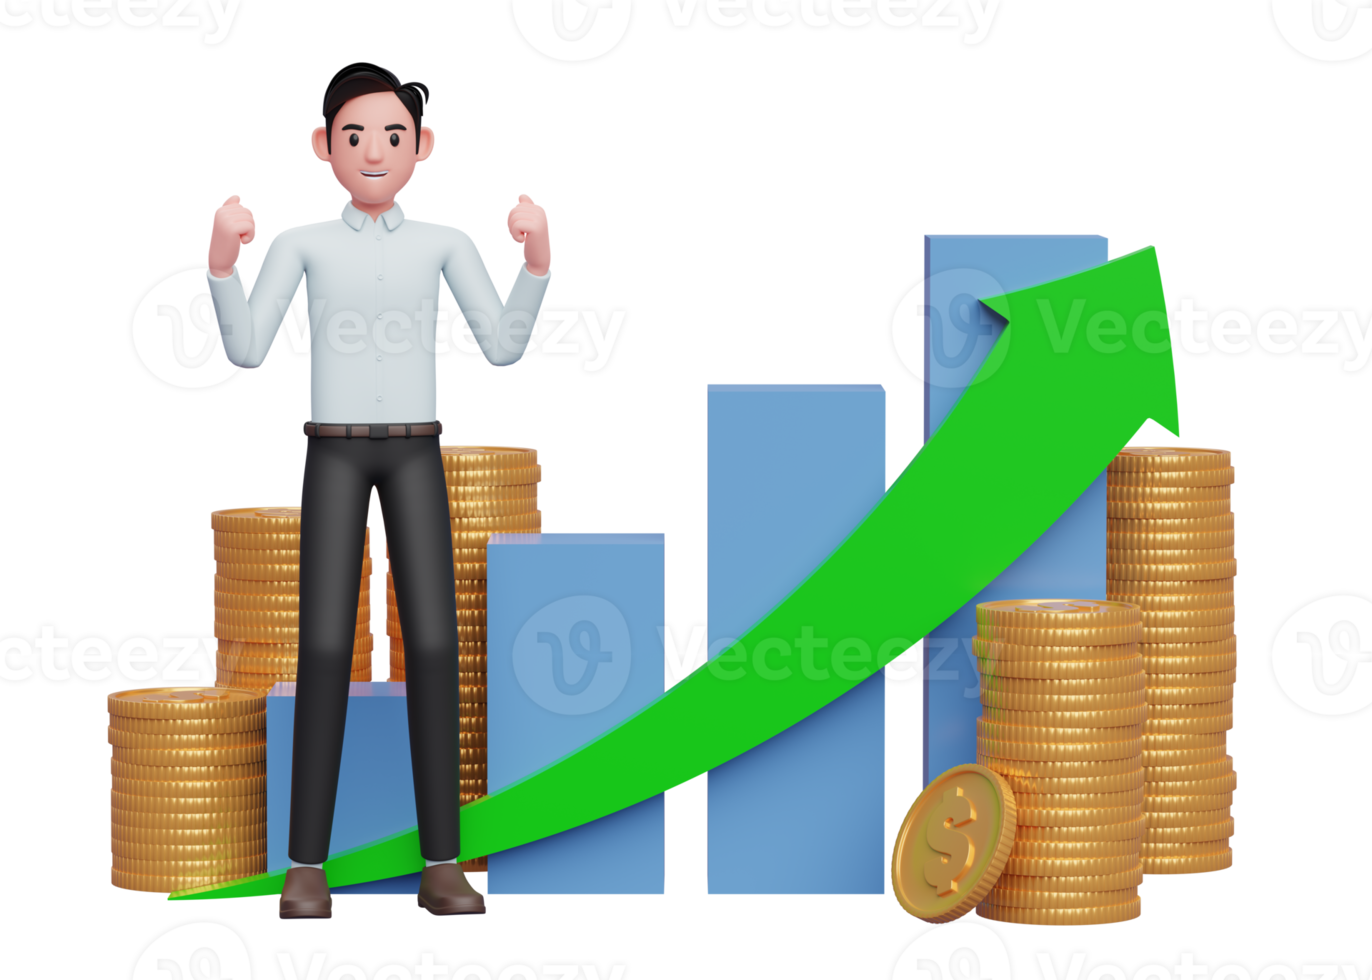 businessman in blue shirt celebrating with clenched fists in front of positive growing bar chart with coin ornament png